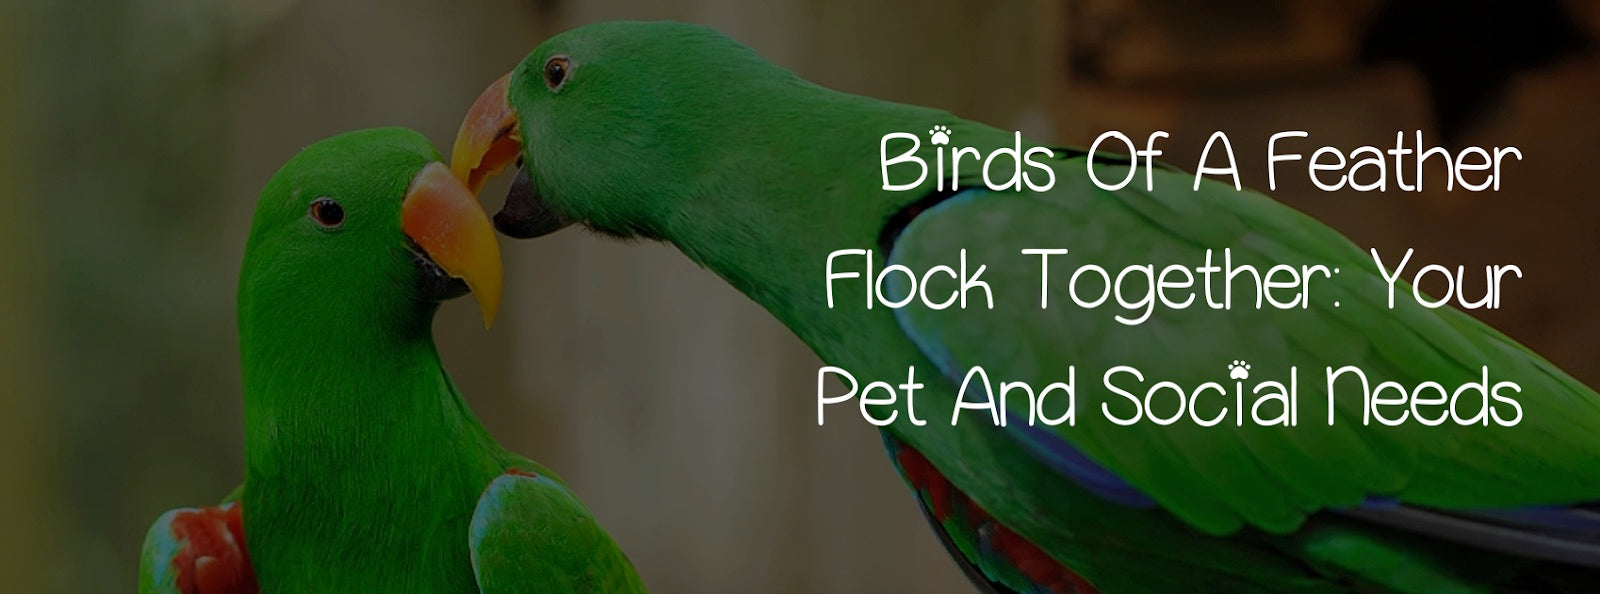 BIRDS OF A FEATHER FLOCK TOGETHER: YOUR PET AND SOCIAL NEEDS